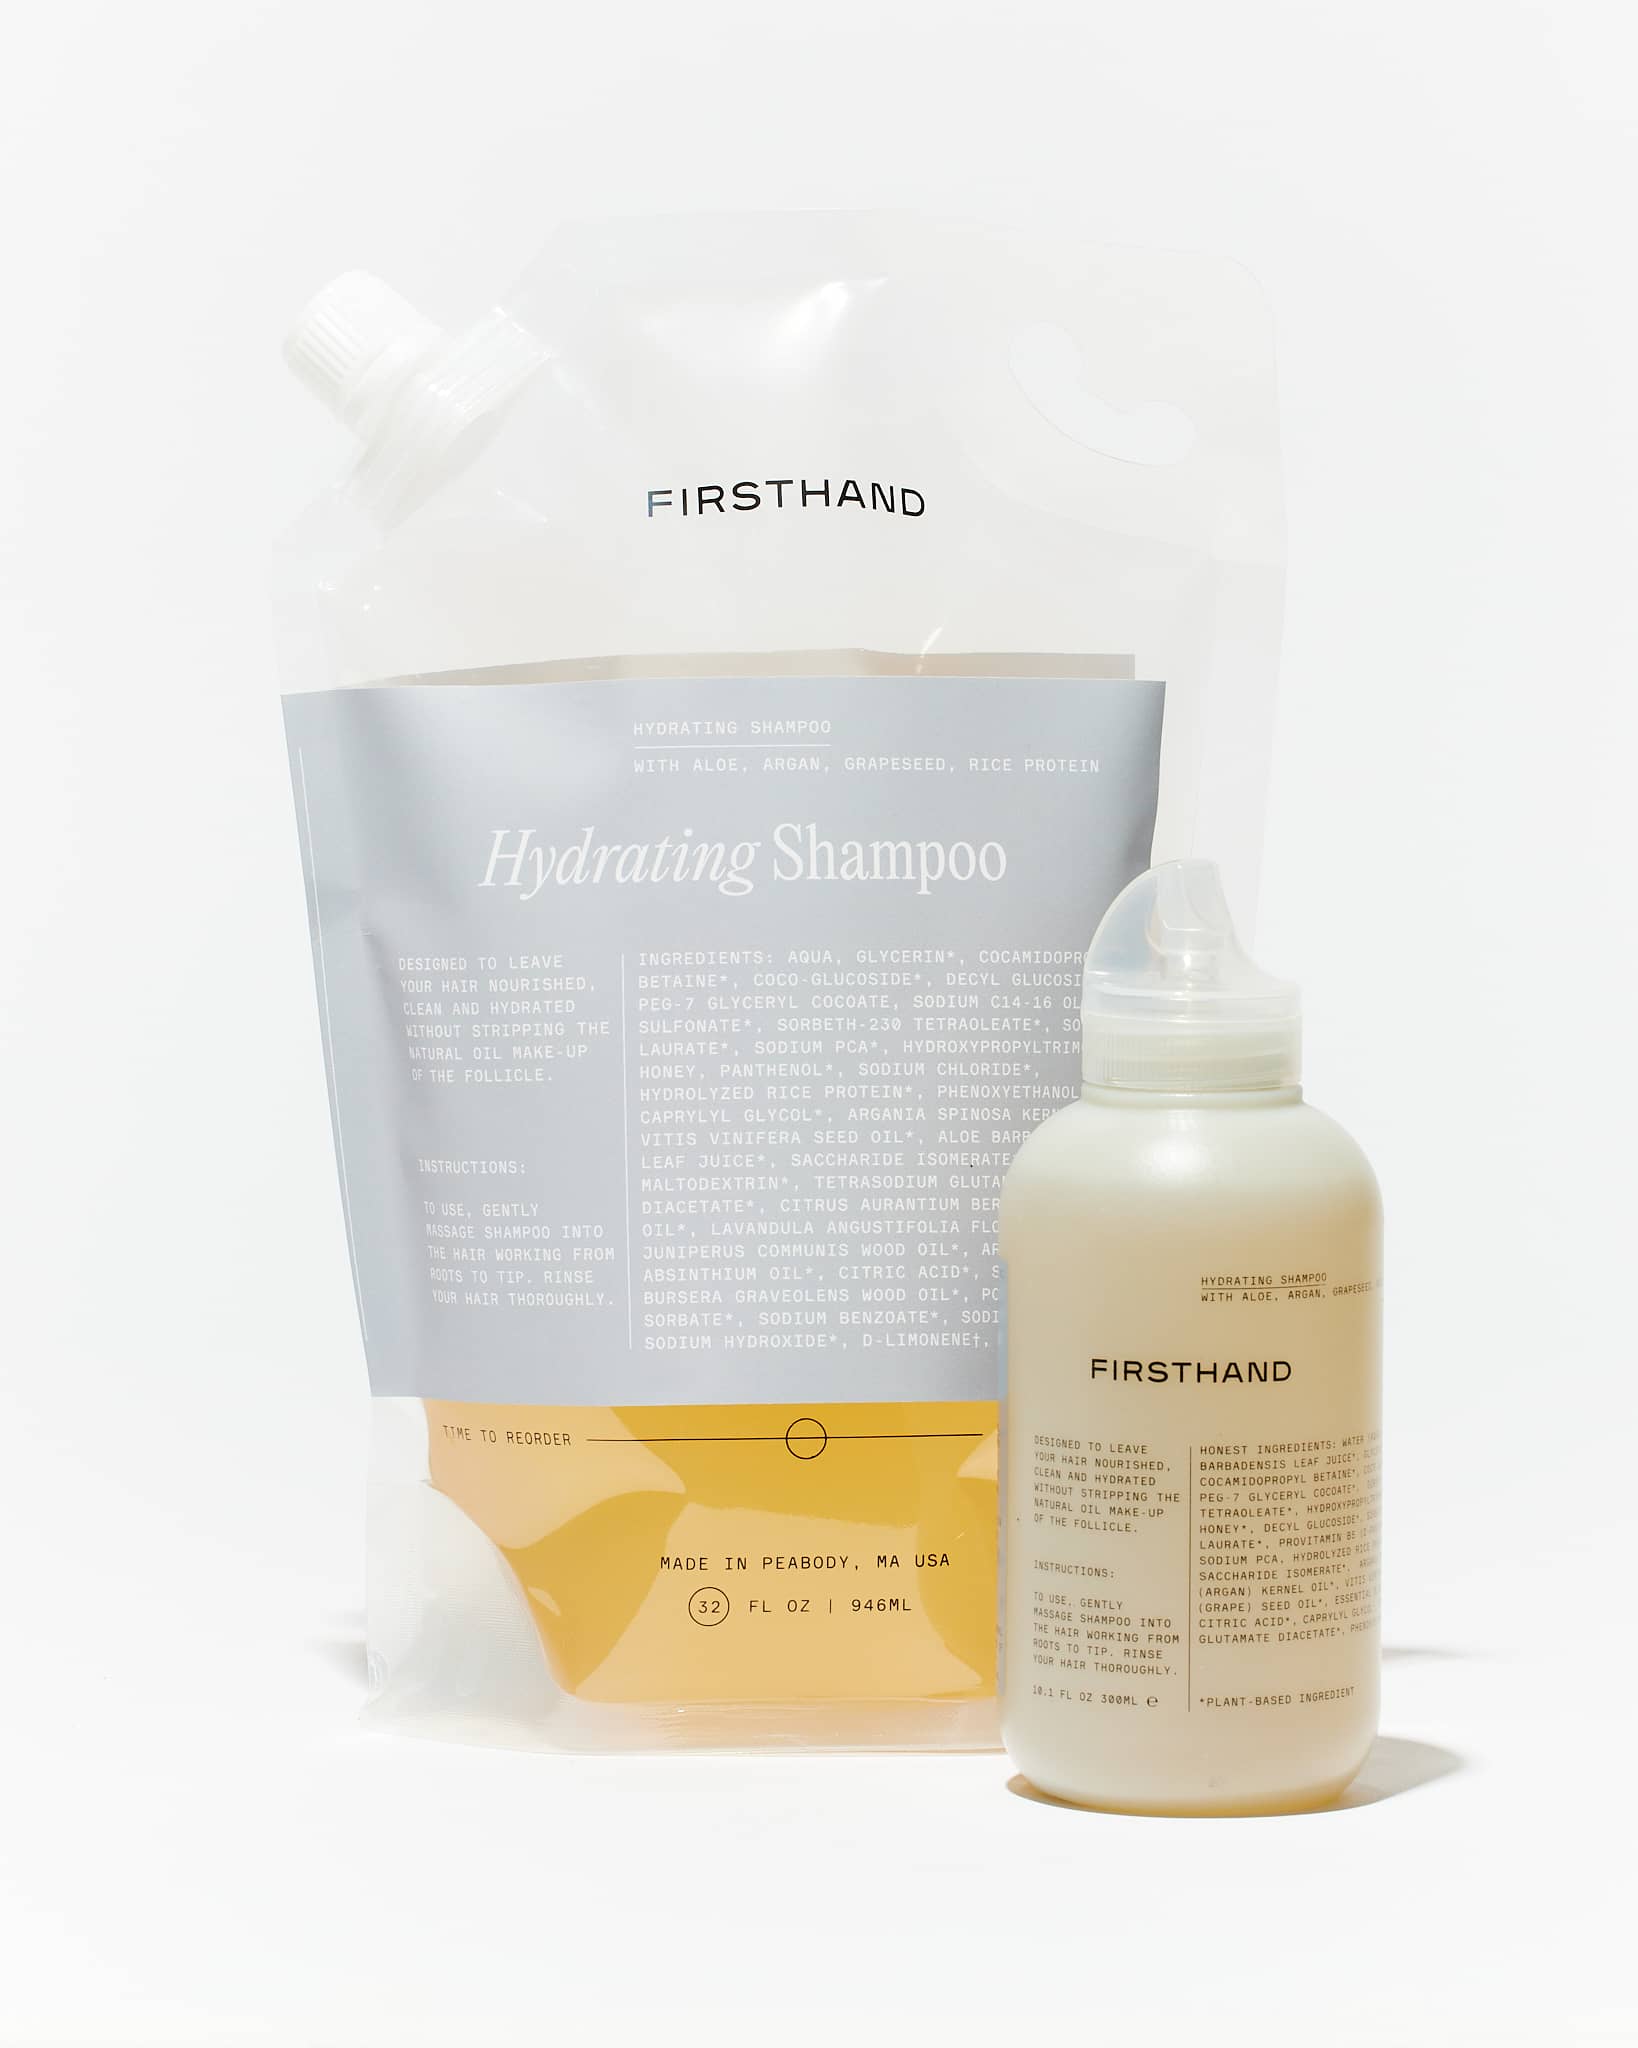 Firsthand Supply Hydrating Shampoo Refill Pouch (32oz)